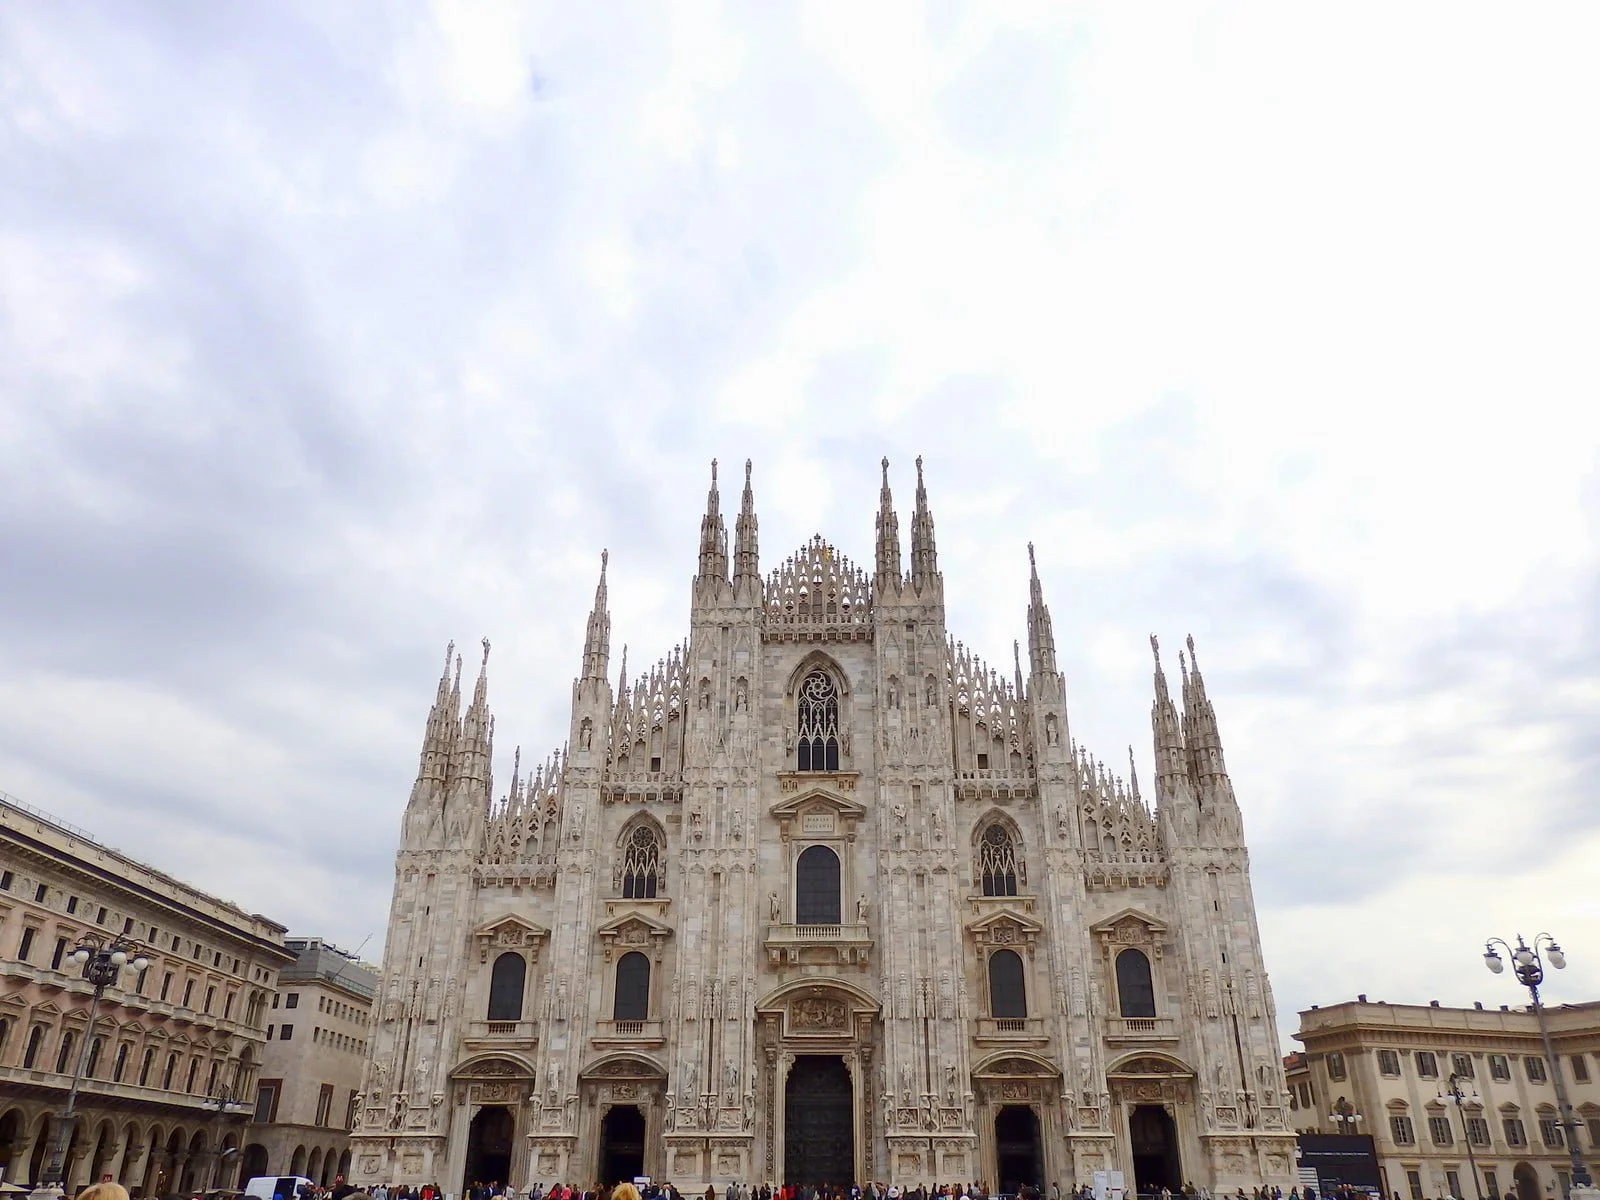 Views of Il Duomo Cathedral in Milan, Italy